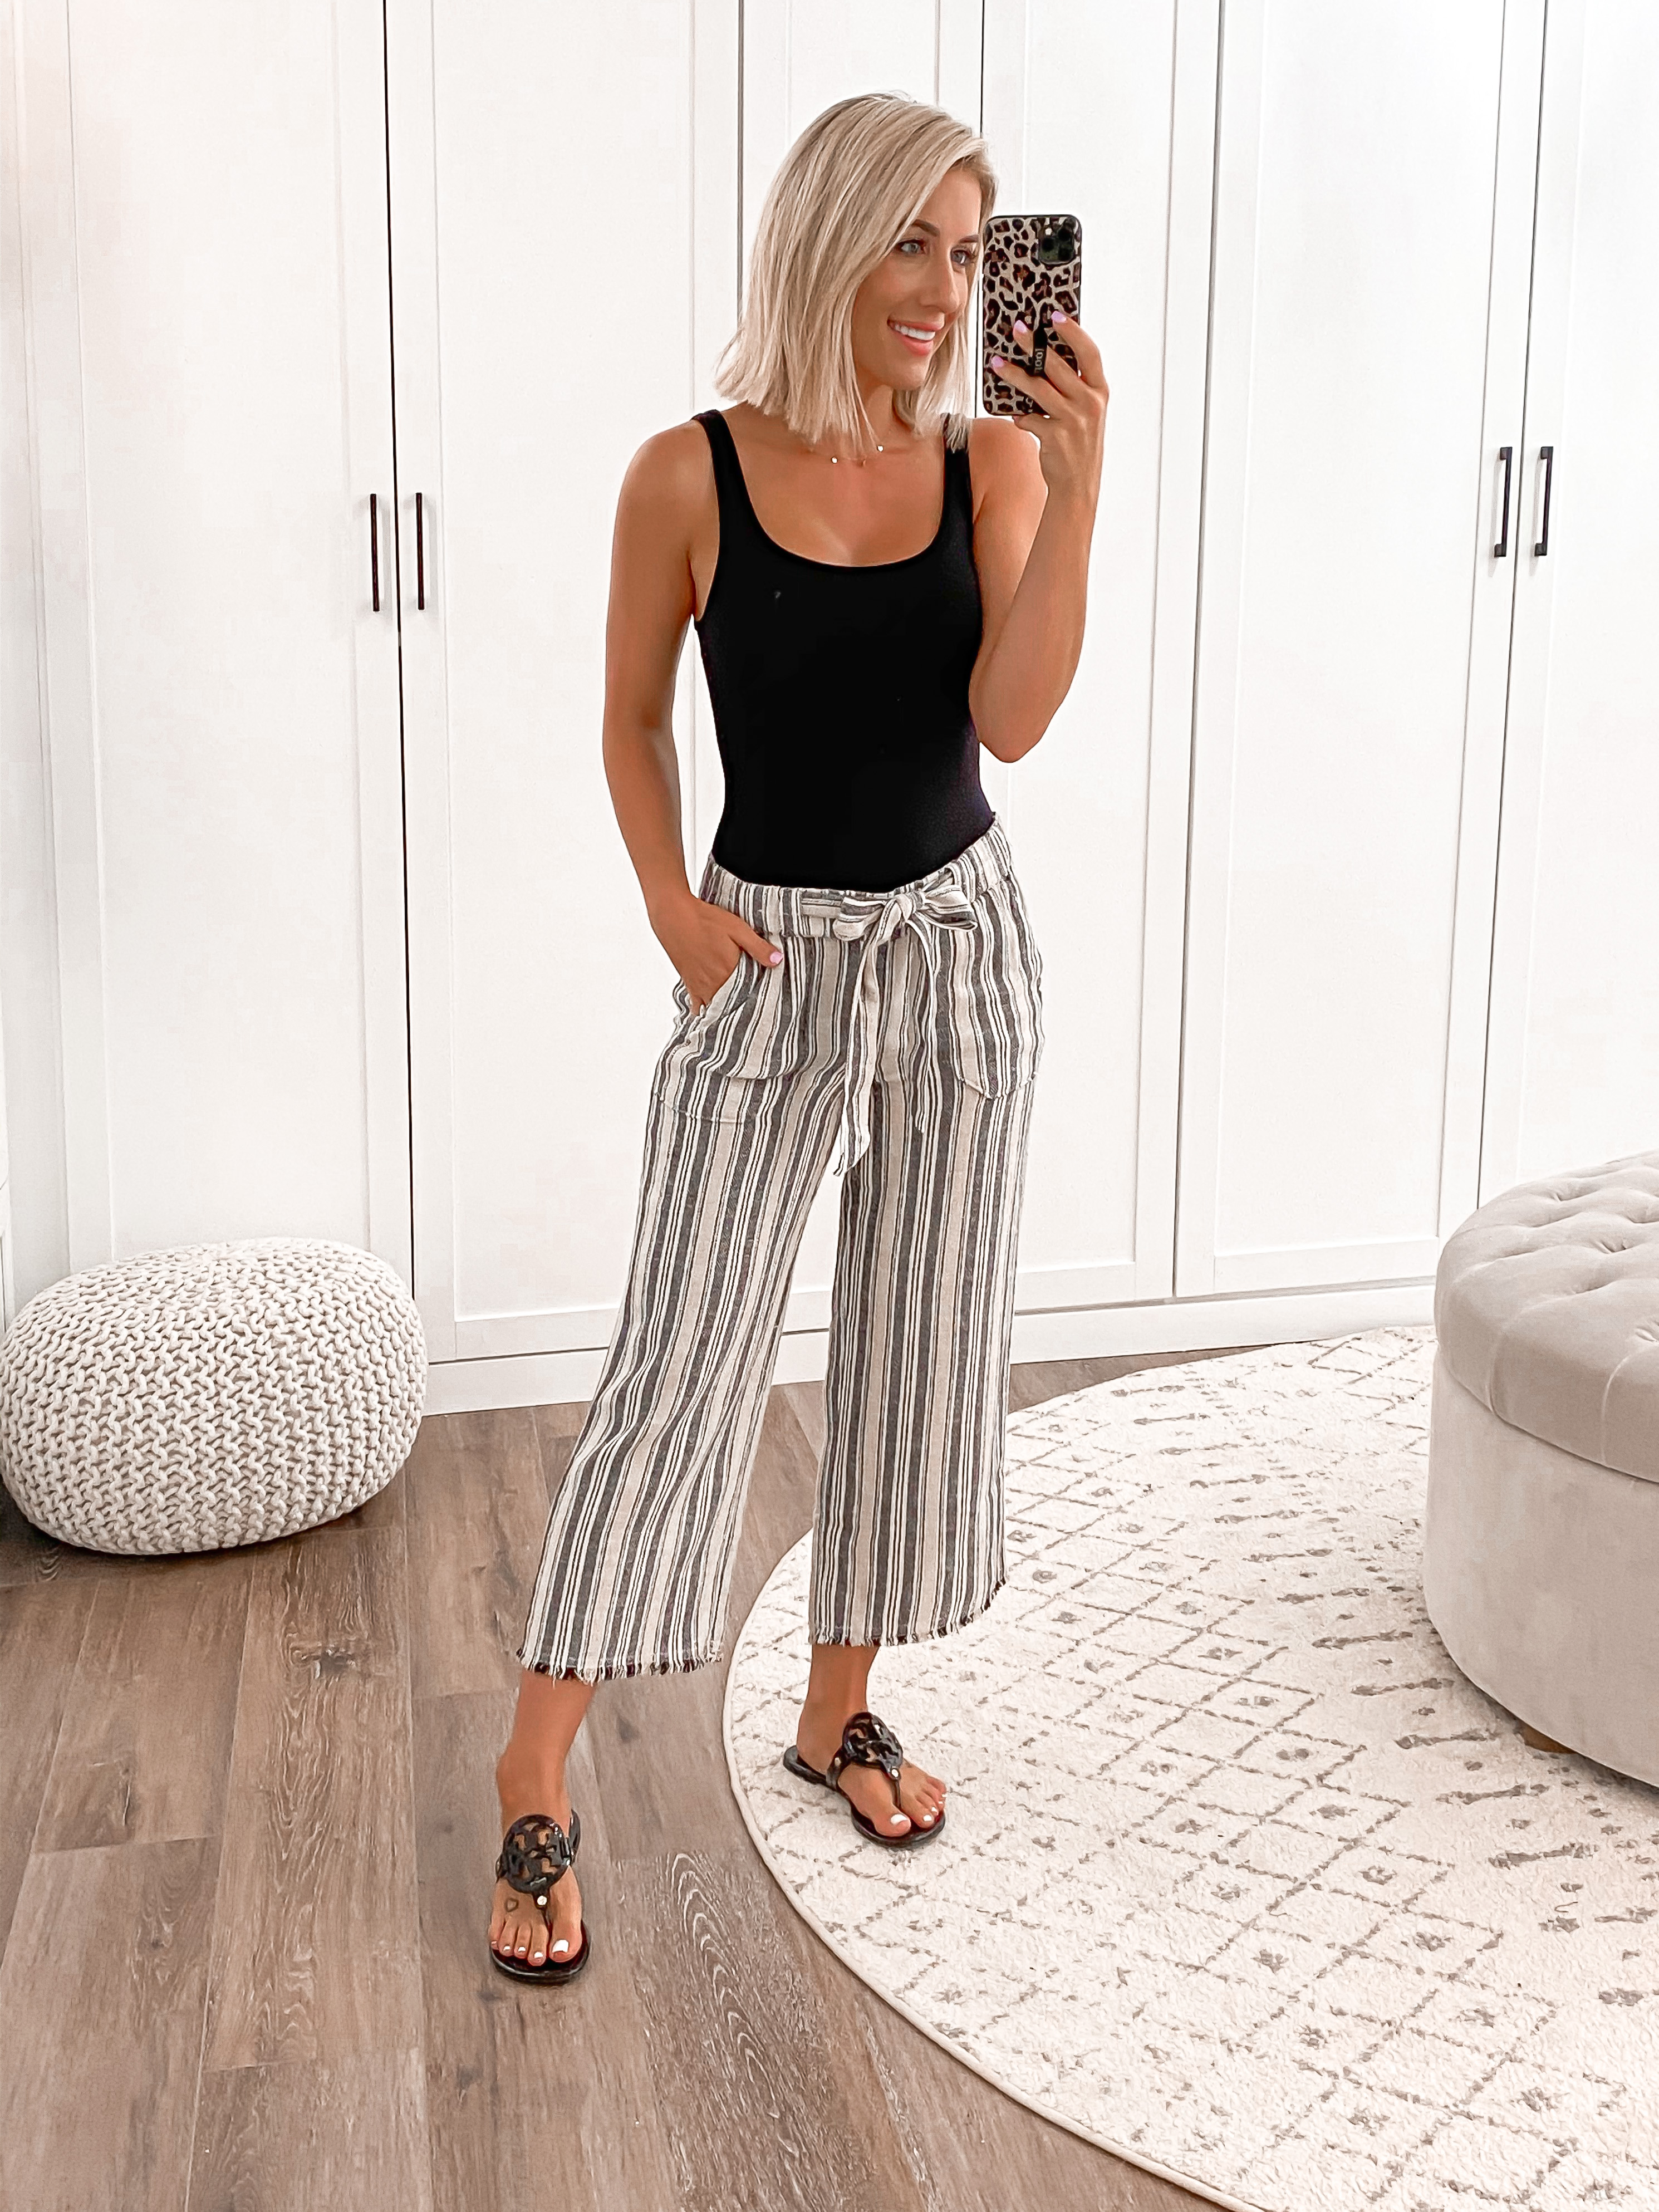 Laura Beverlin casual summer outfit idea nordstrom rack